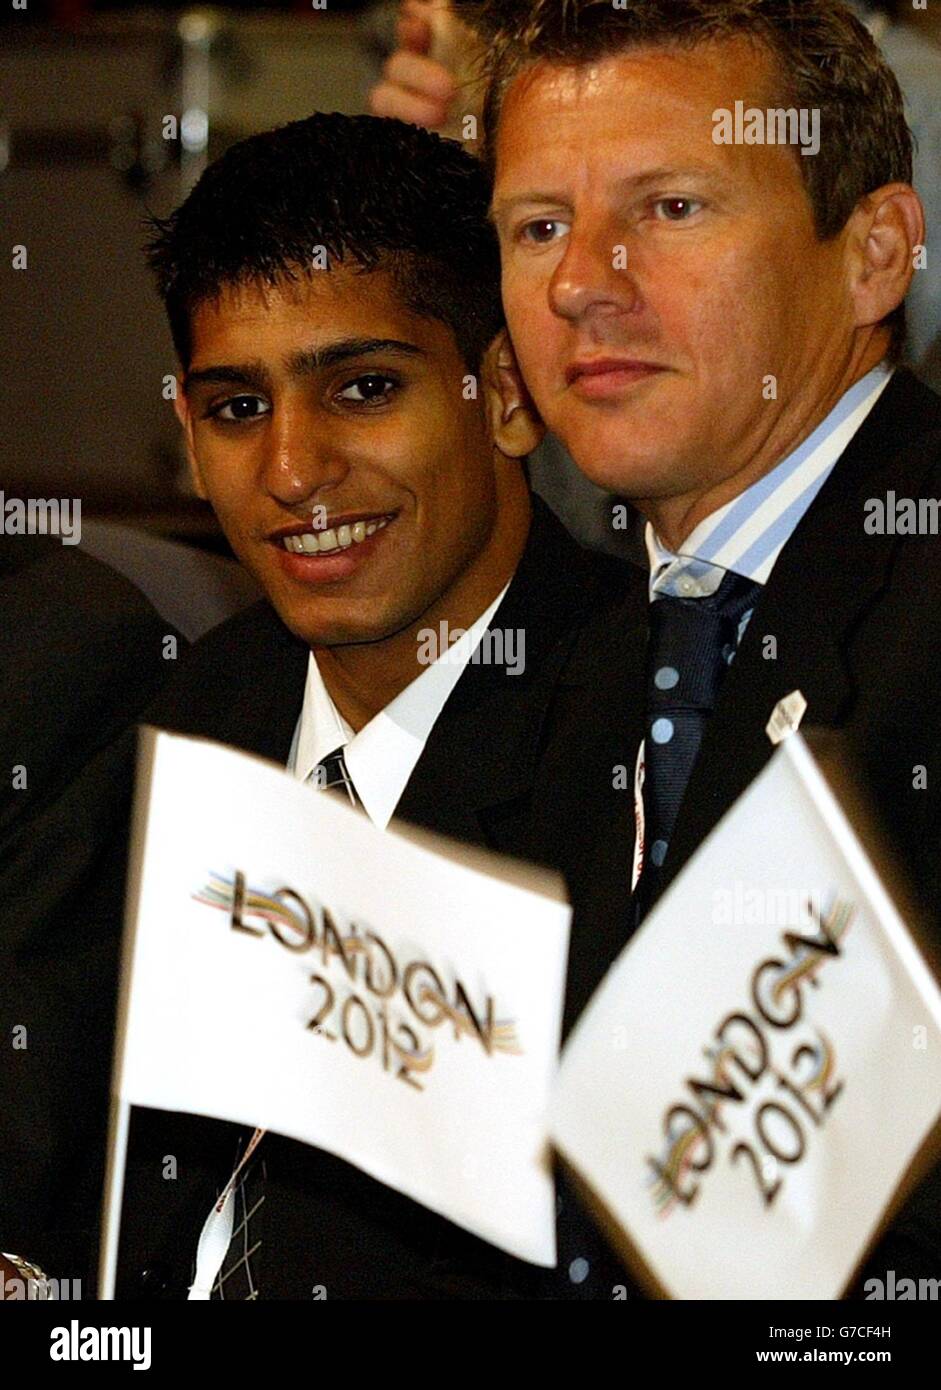 Olympic boxing silver medalist Amir Khan (left), with former Olympic runner Steve Cram at the Labour Party Conference in Brighton, as they gather support for London's 2012 Olympic bid. Stock Photo